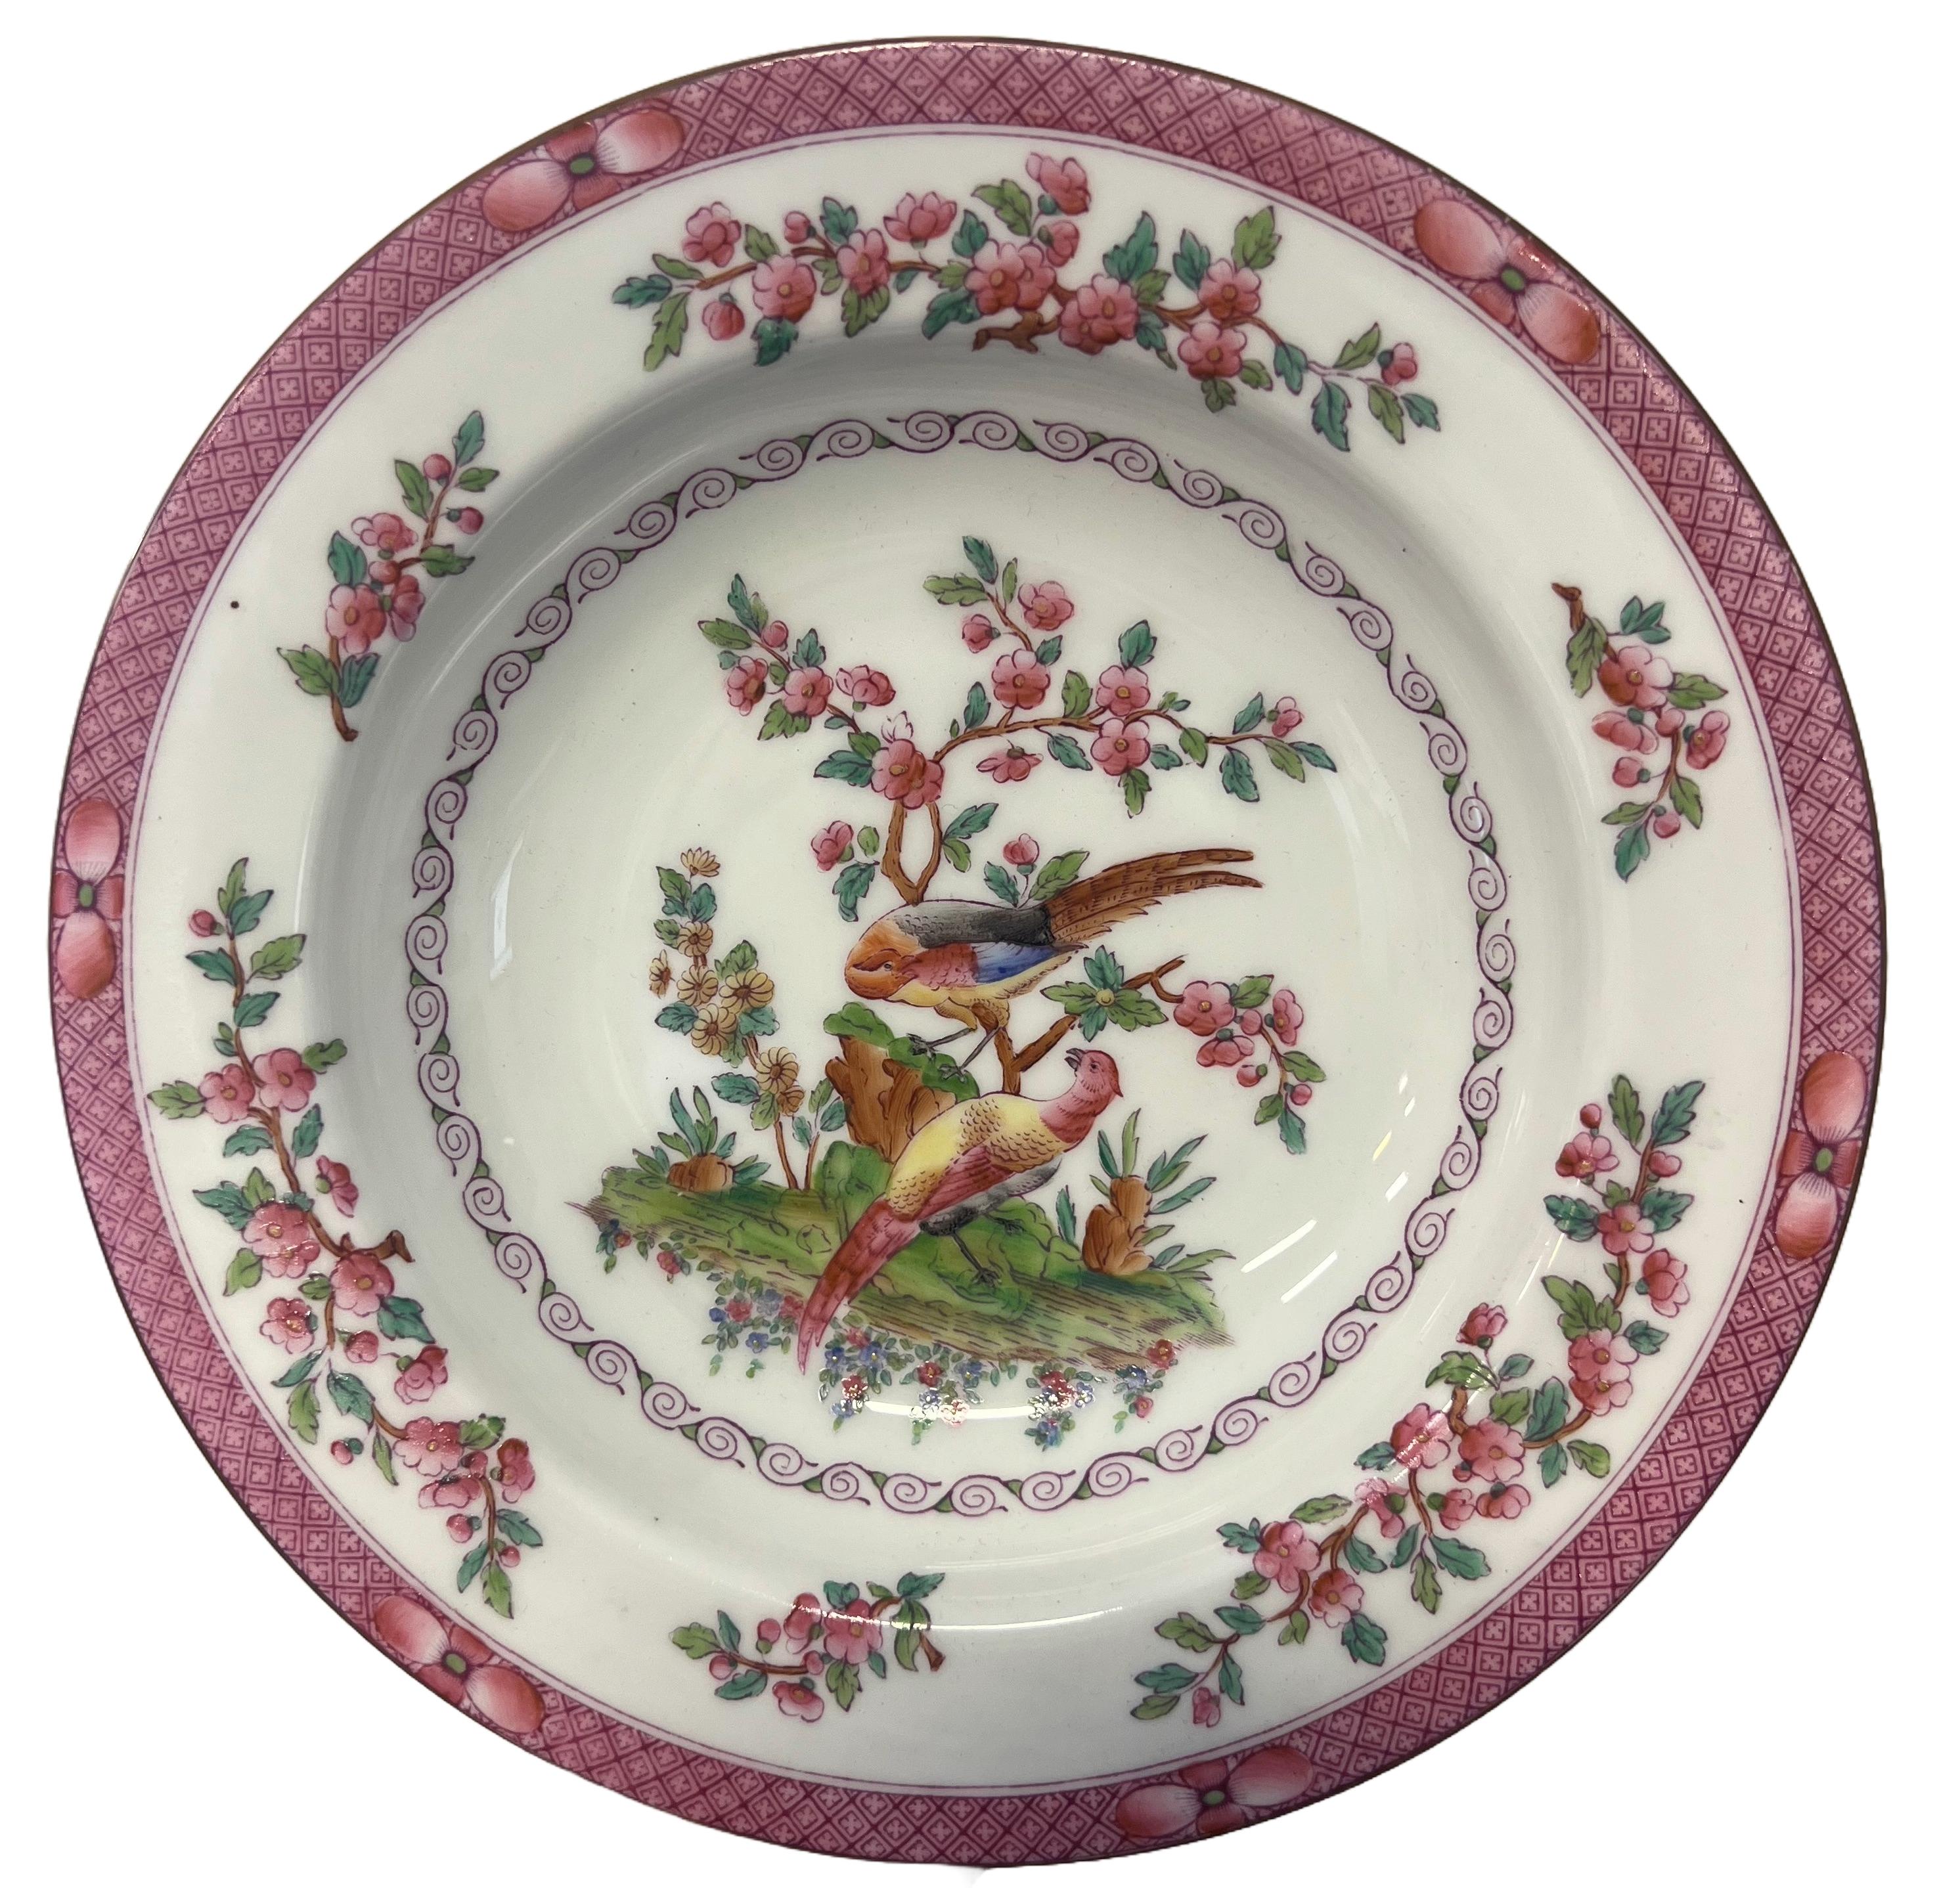 Eleven English Royal Worcester Porcelain Plated Retailed by Tiffany & Co, Circa 1900
Having a white ground base with pink borders and accents depicting birds sitting on a branch 
The rear marked Tiffany & Co New York & Royal Worcester England and